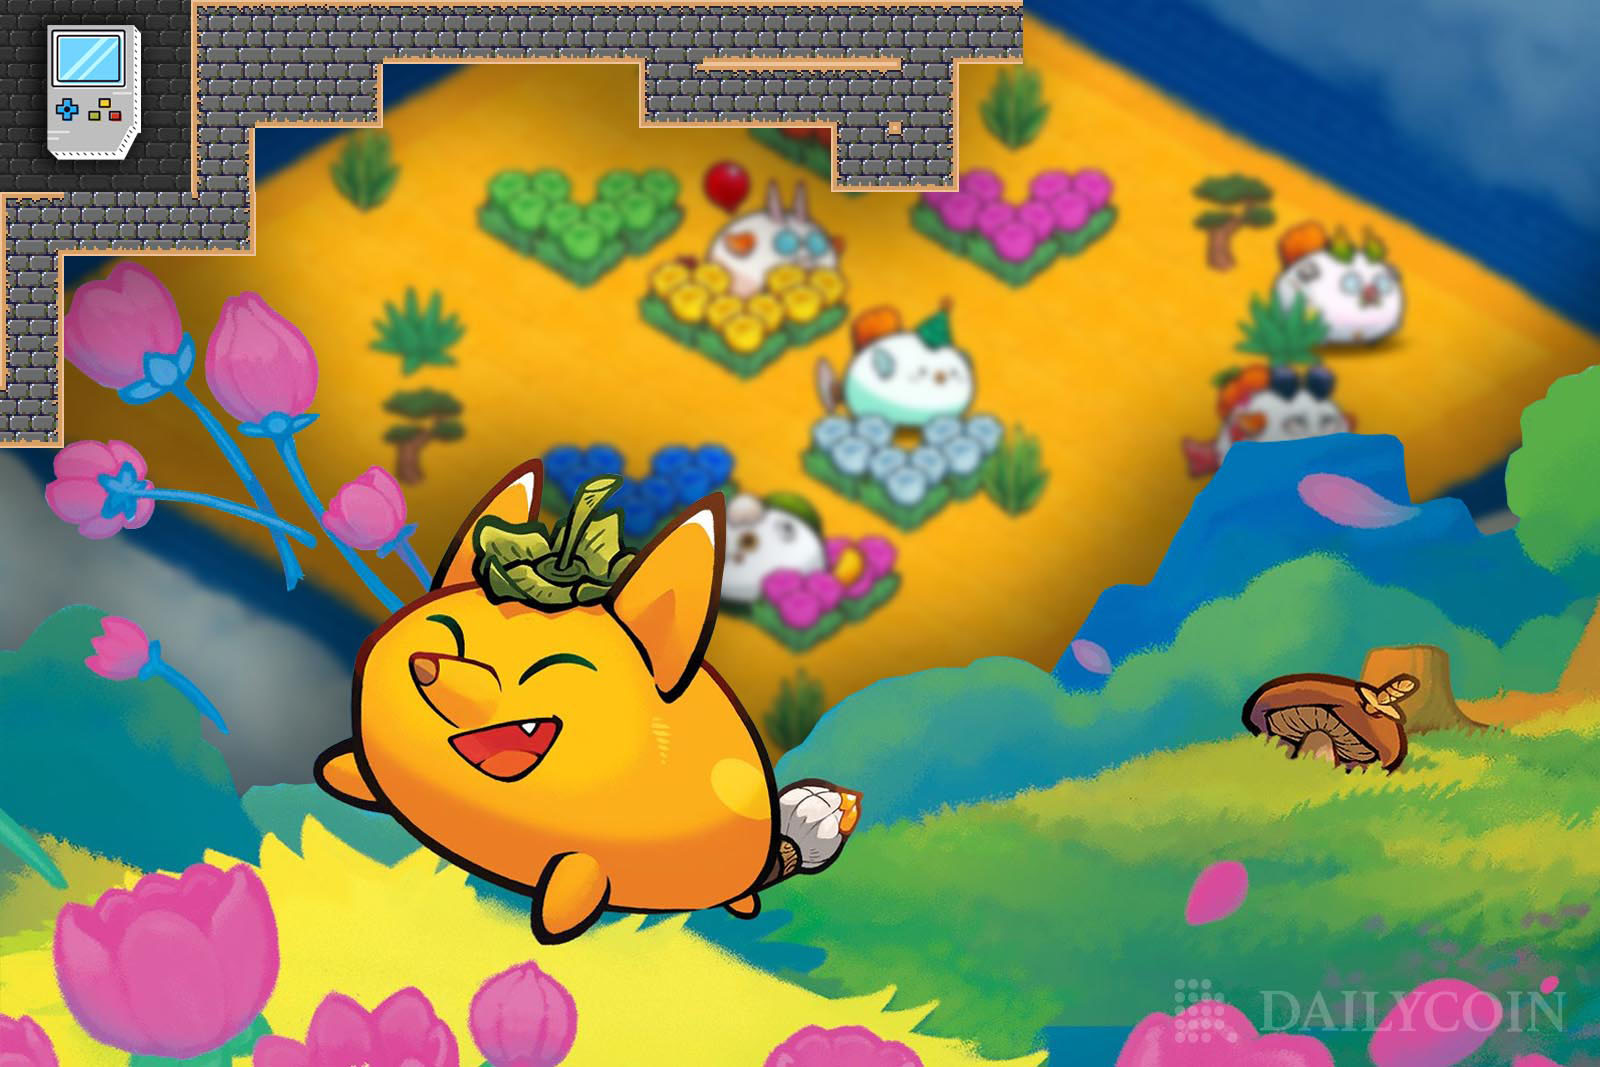 Axie origins game yellow character jumping on grass